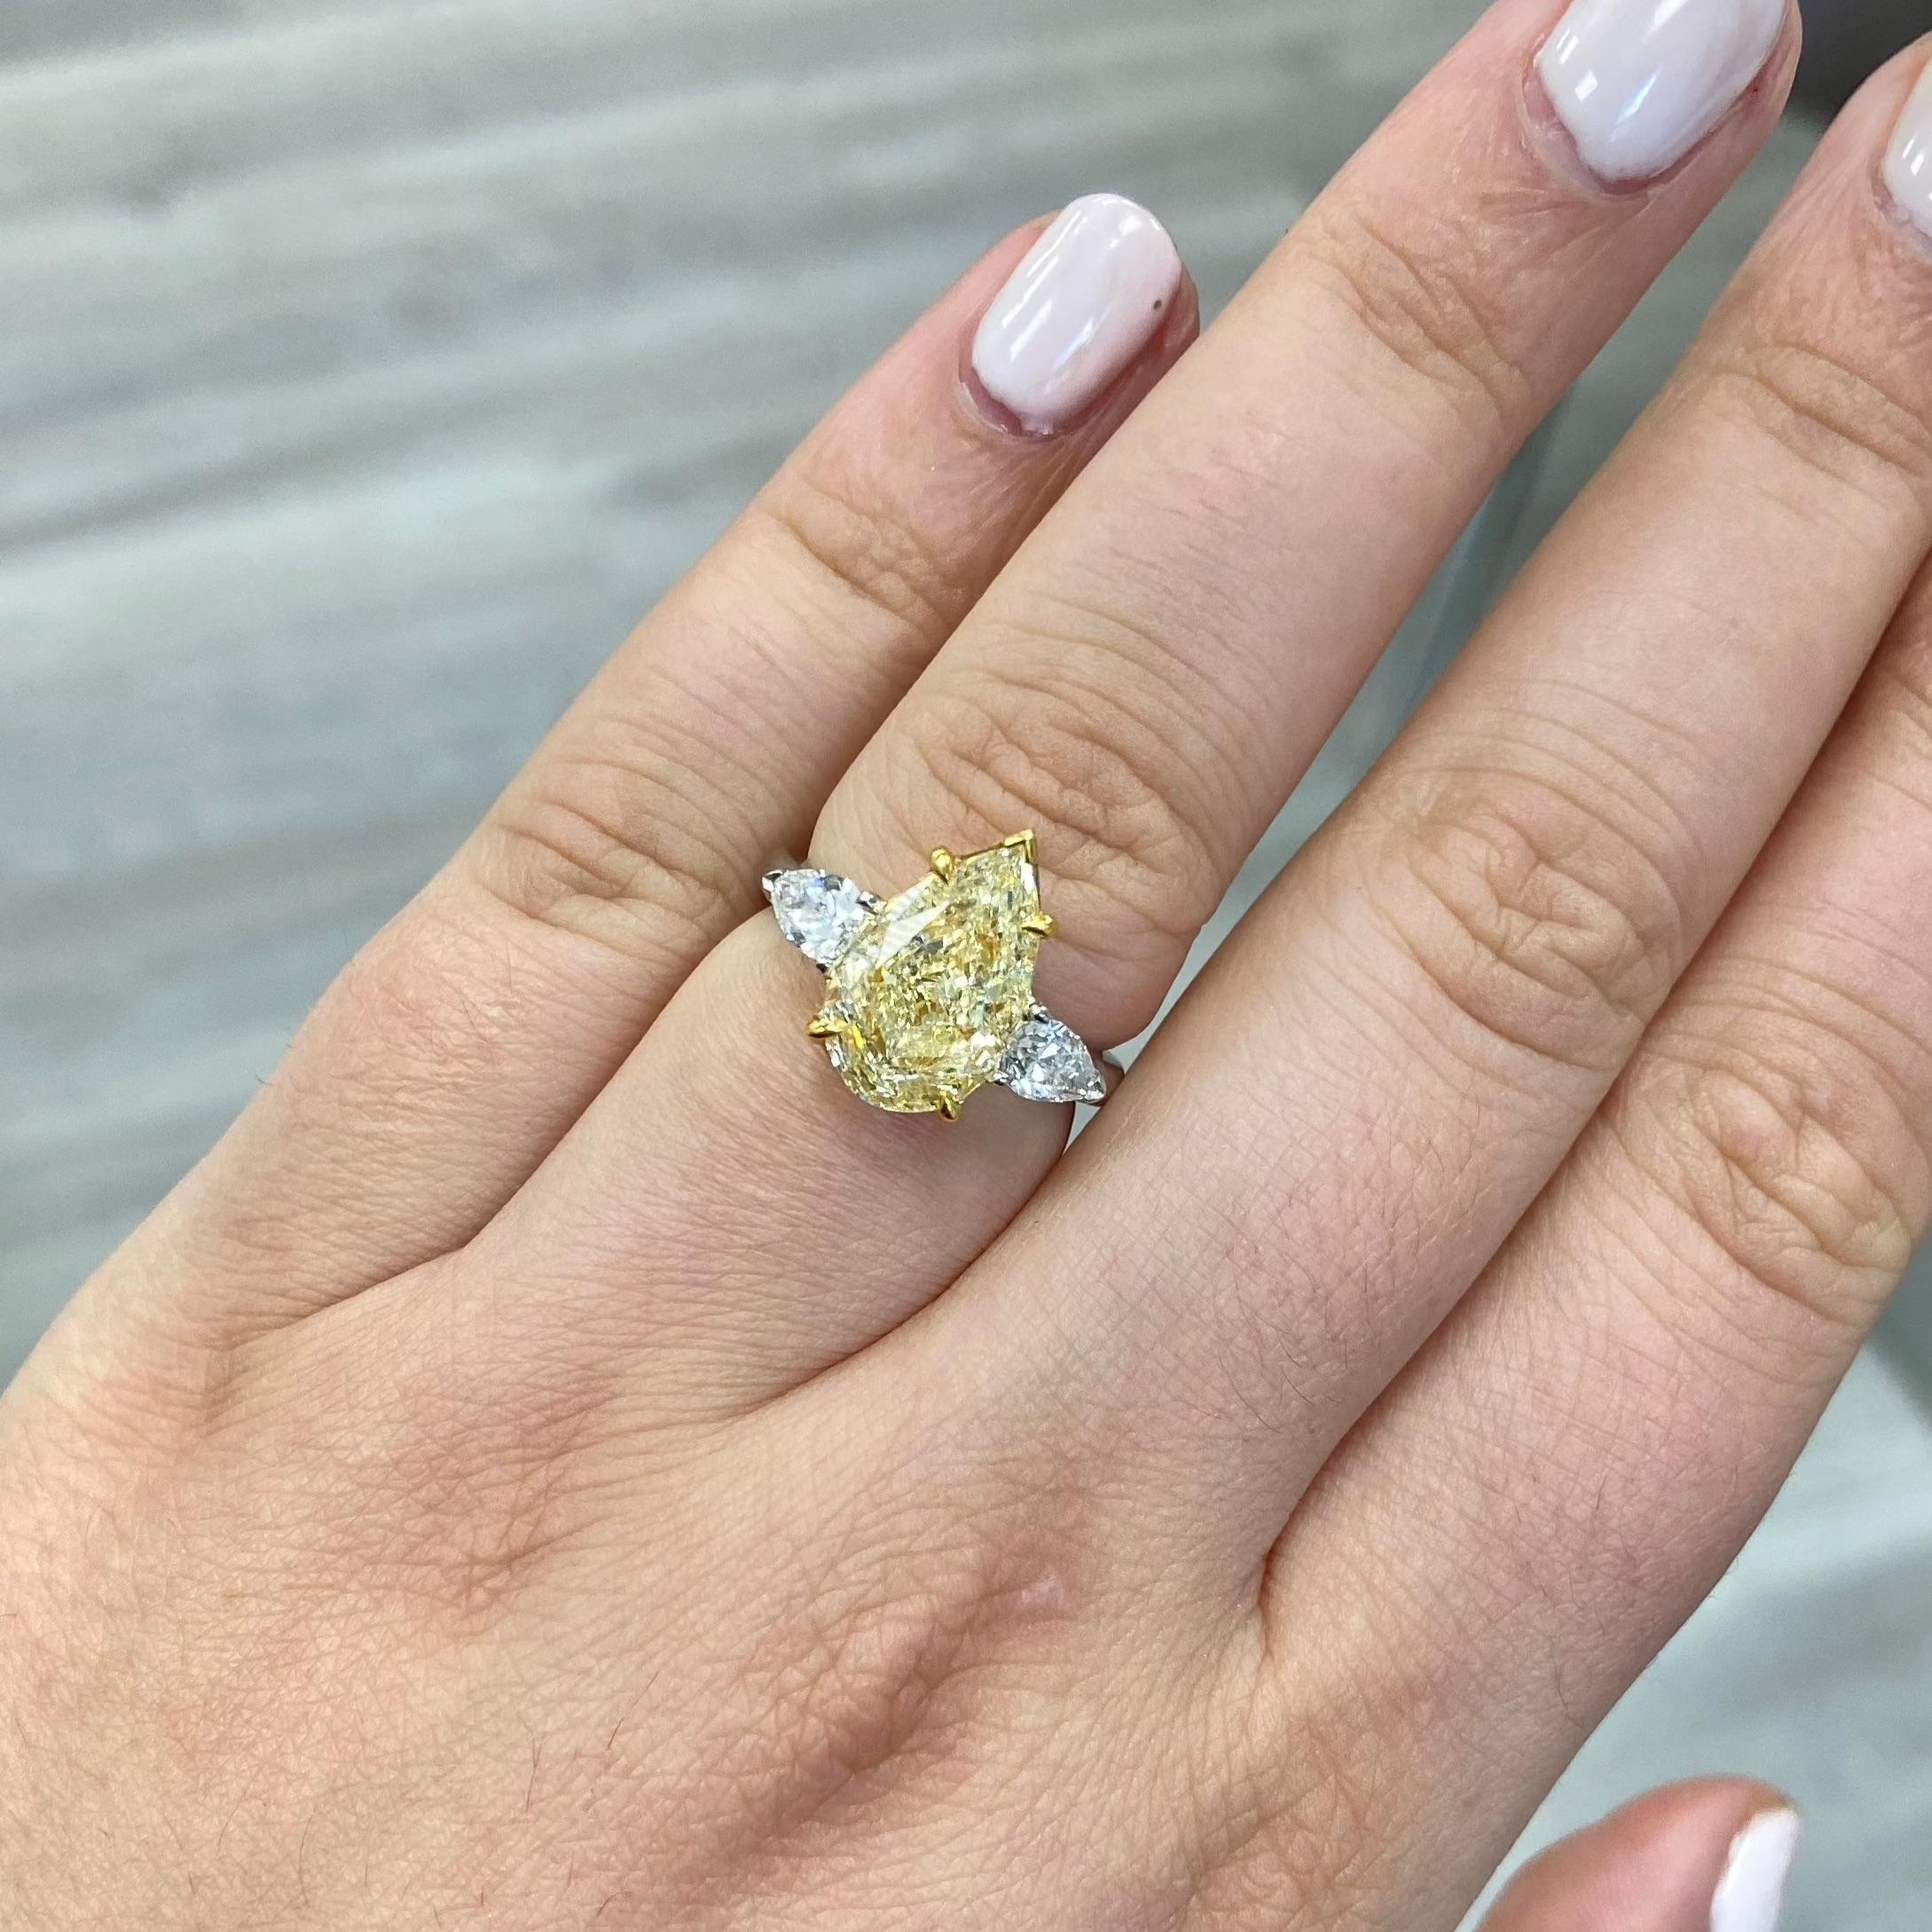 Gorgeous ring with a vibrant 4ct W-X colored pear shape full of life, no bow tie, and a perfect pear shaped model
Set in Platinum and 18kt Yellow Gold with colorless pear shapes going down the sides

Making Extraordinary Attainable with Rare Colors
